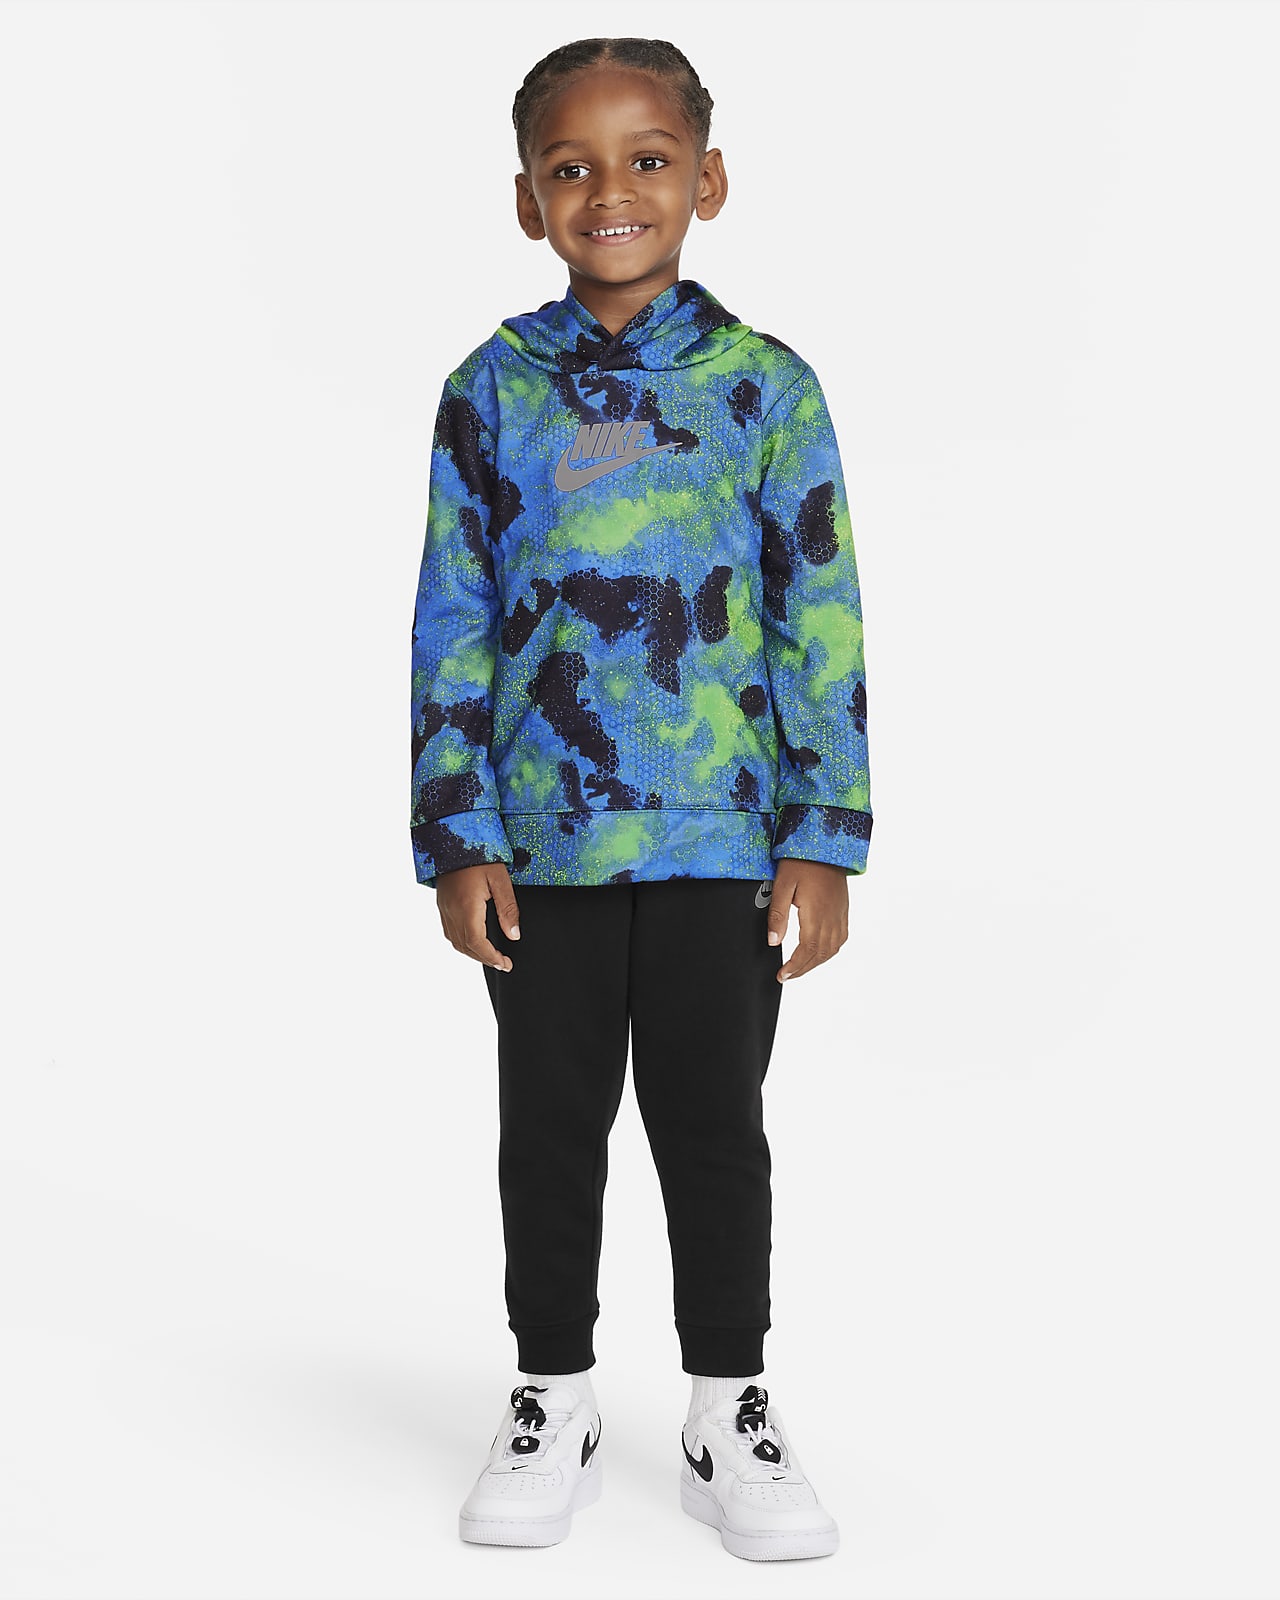 Nike Toddler Hoodie and Trousers Set